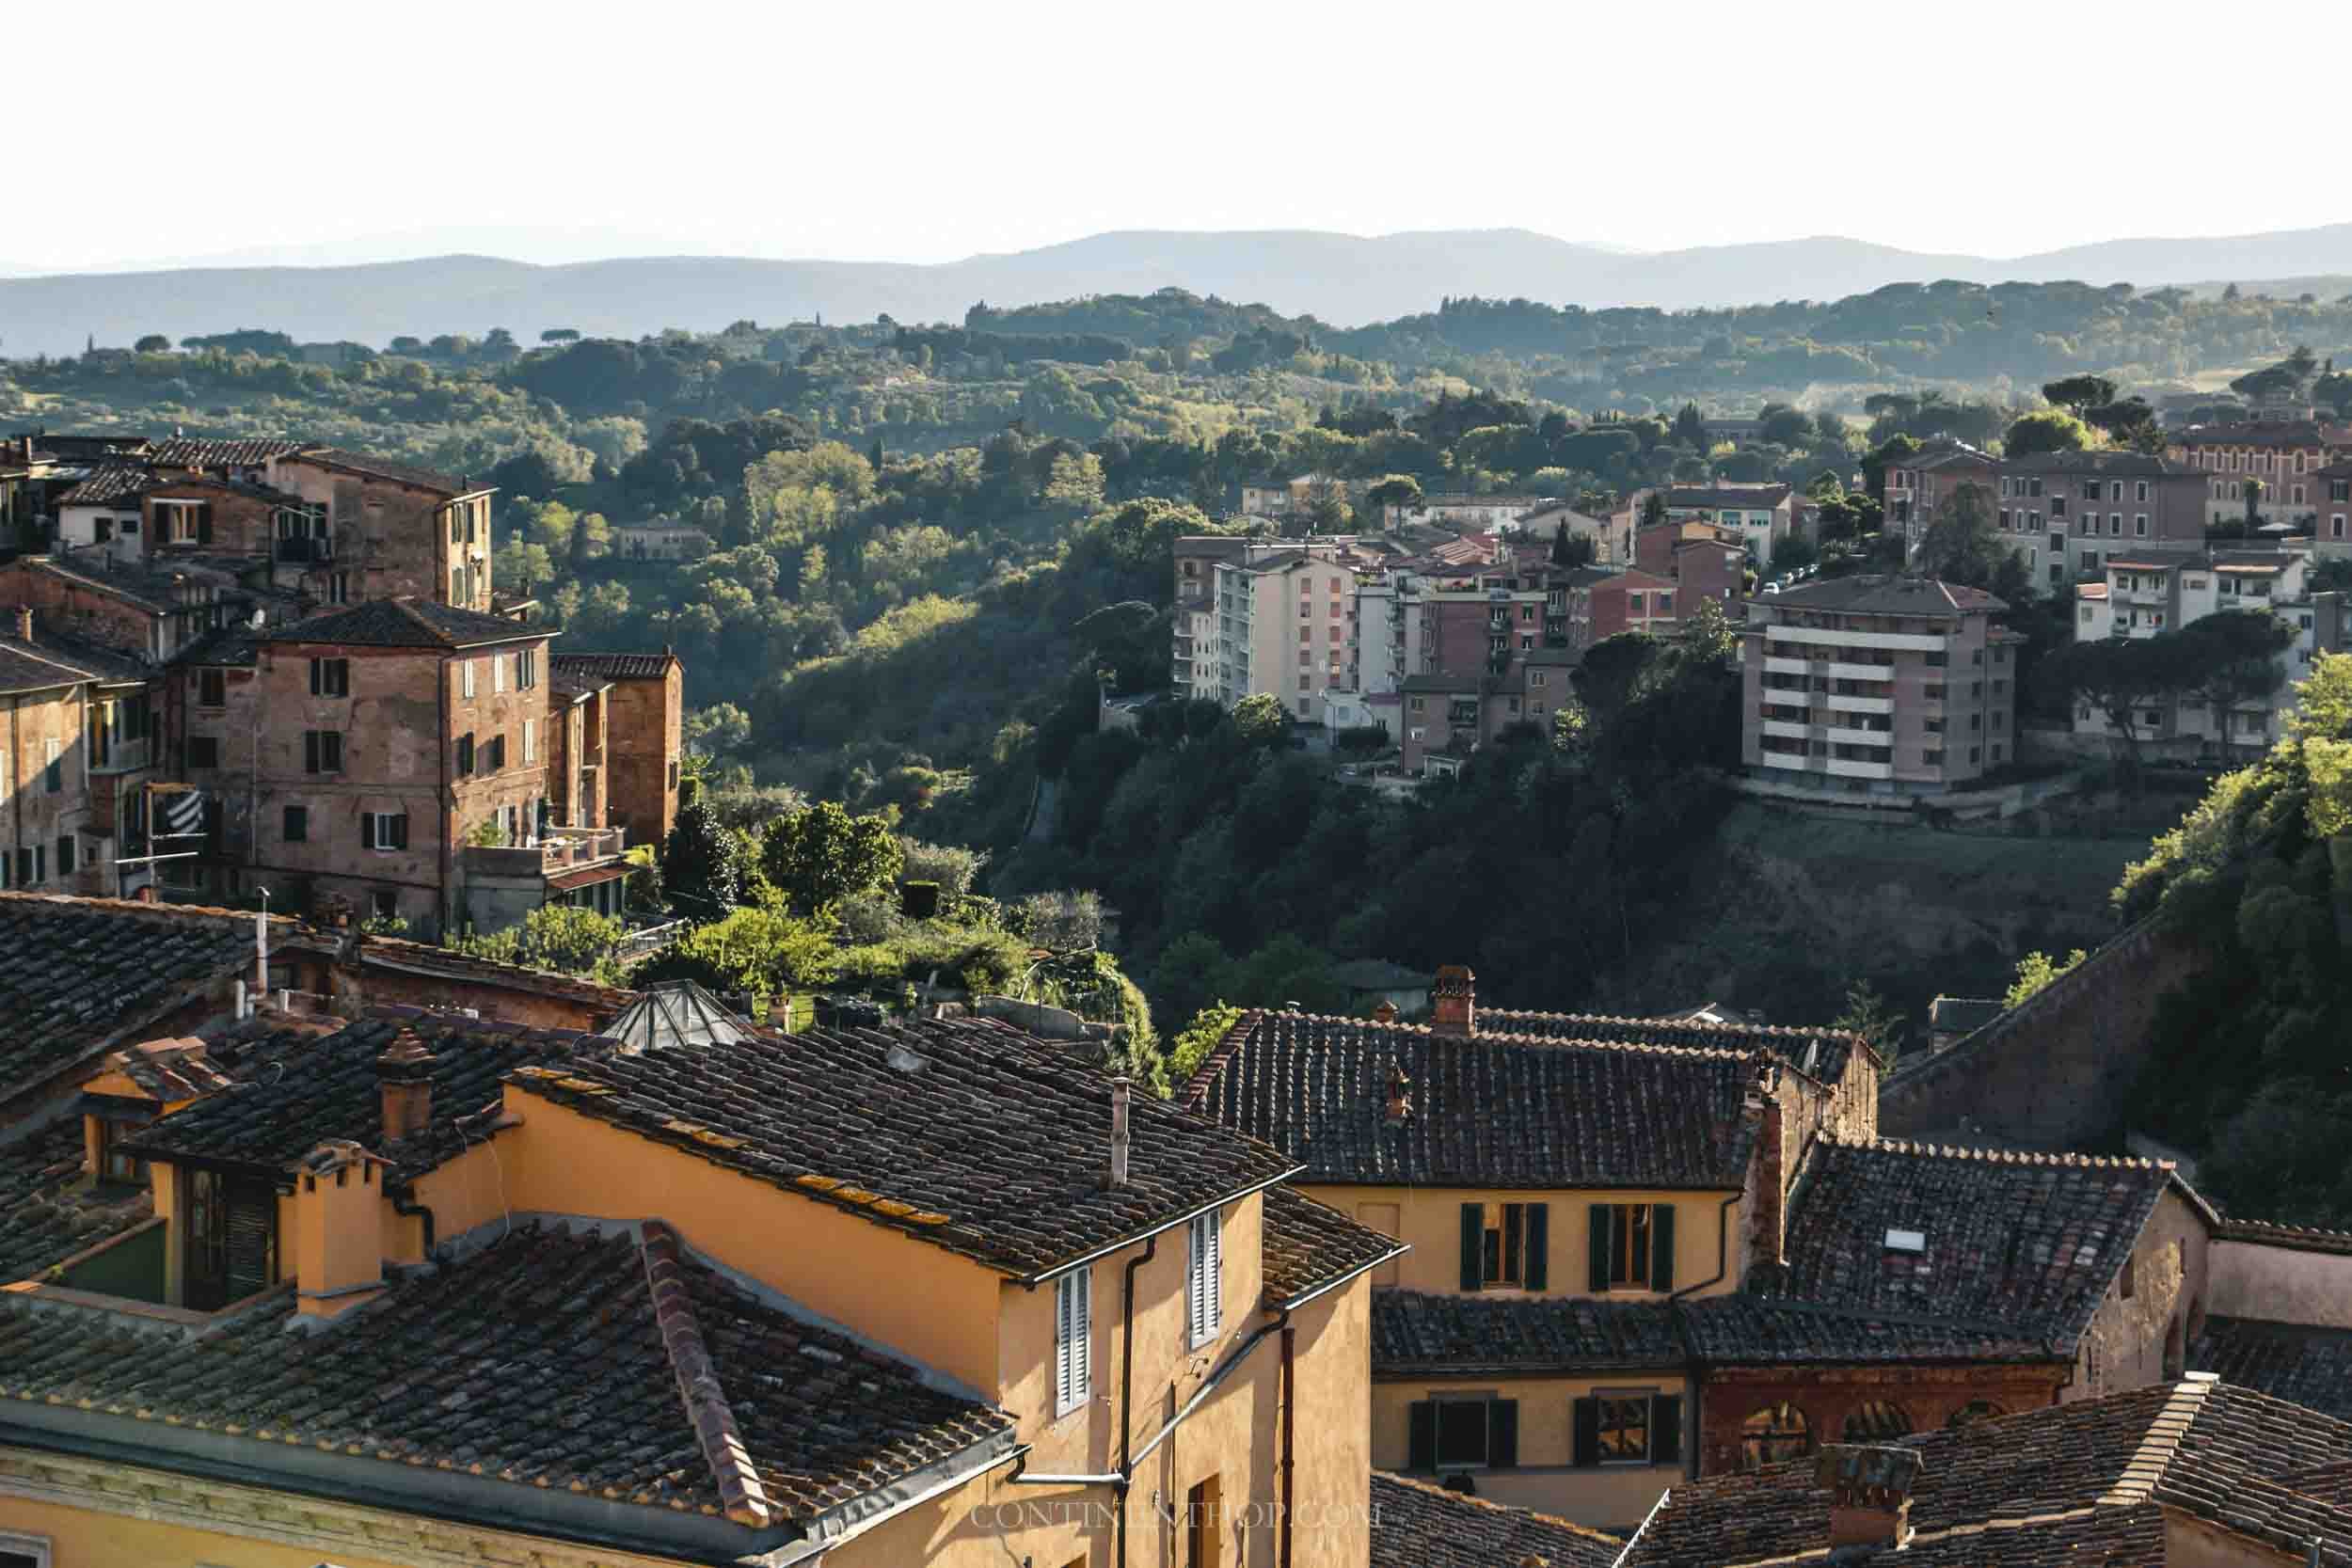 Rooftops in Siena on a 12 day Italy itinerary